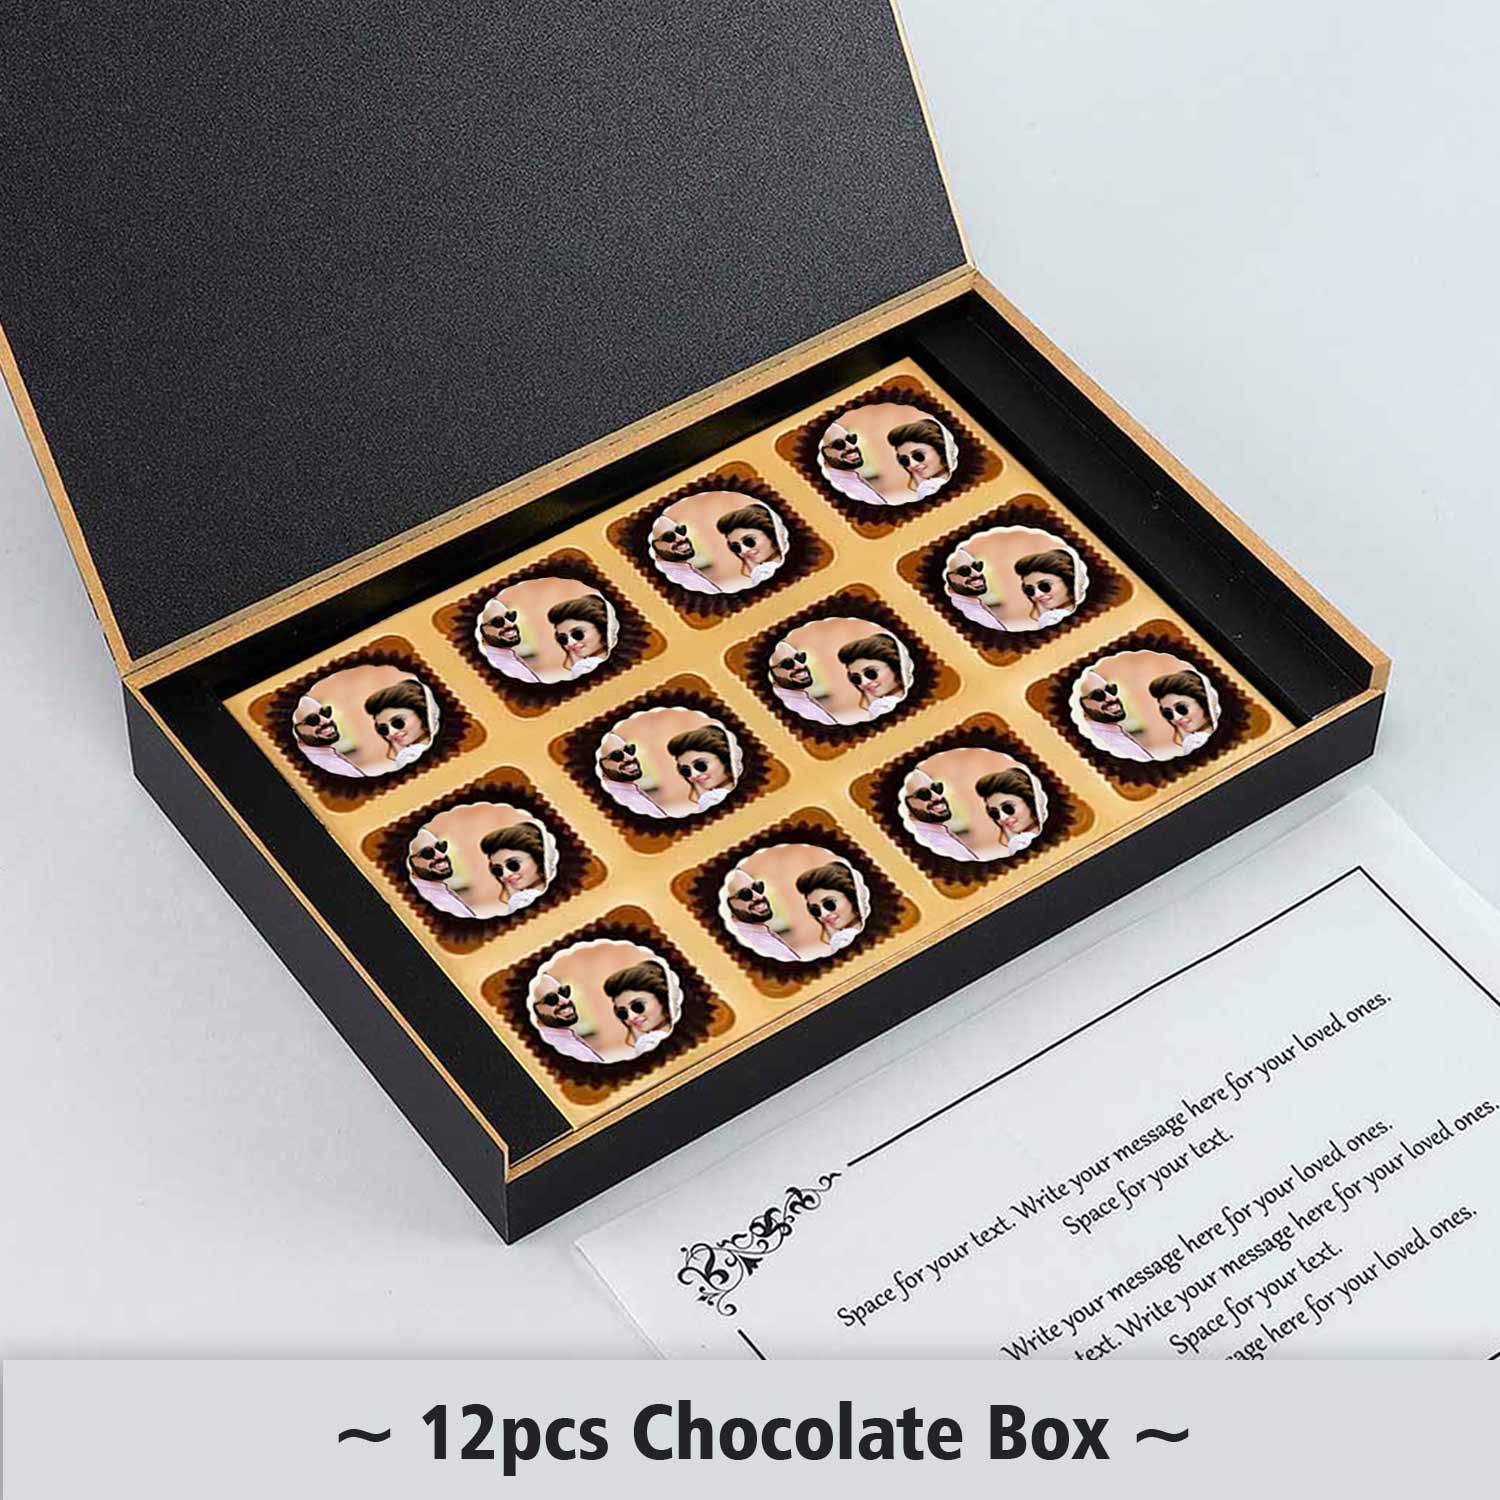 Your Favorite couple's photo printed on chocolate